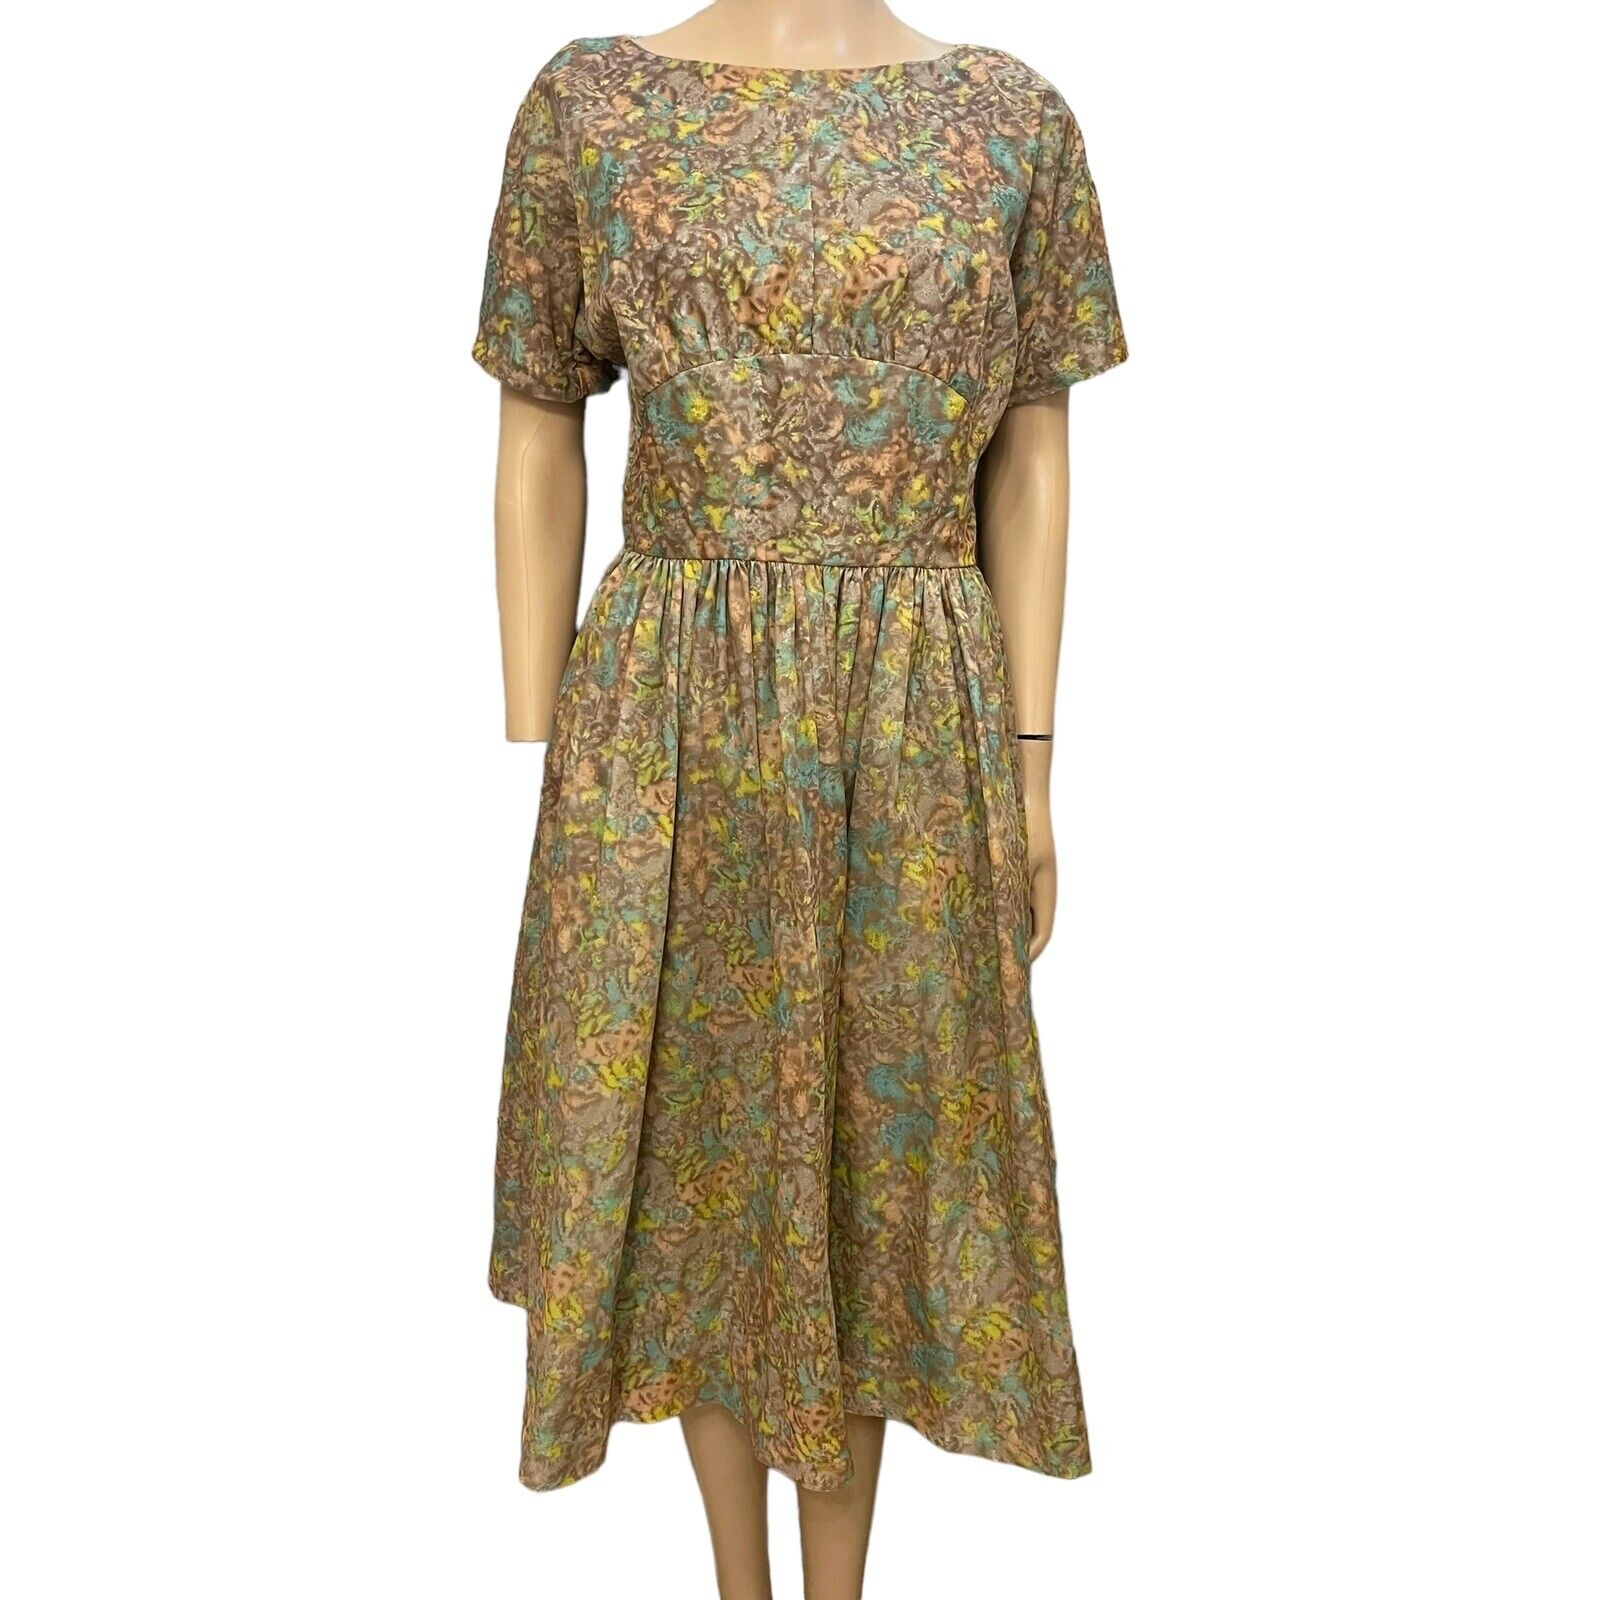 Vintage 50s Housewife Dress Fit And Flare Midi Watercolor Print Handmade Medium